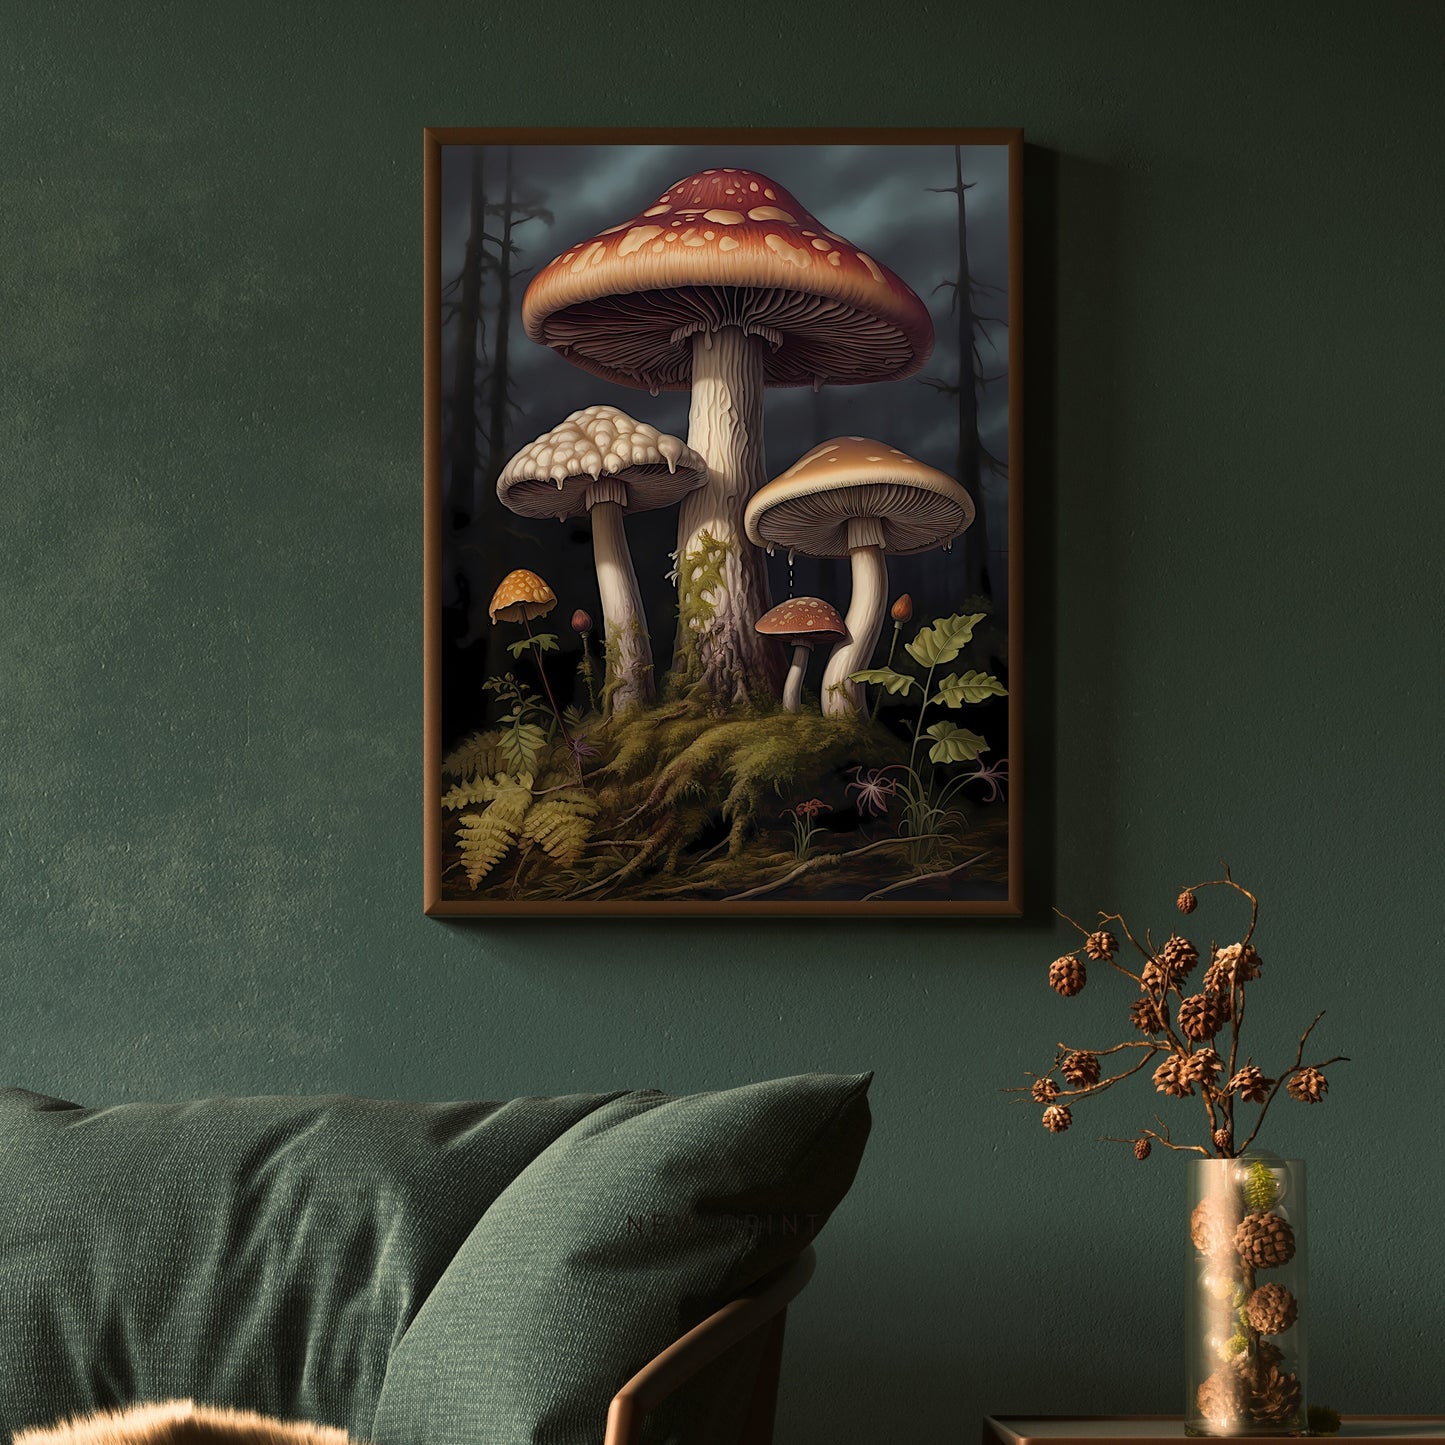 Mushrooms in Woodland Paper Poster Prints Wall Art Dark Academia Goblincore Vintage Botanical Decor Witchy Gothic Cottagecore Mushroom Poster